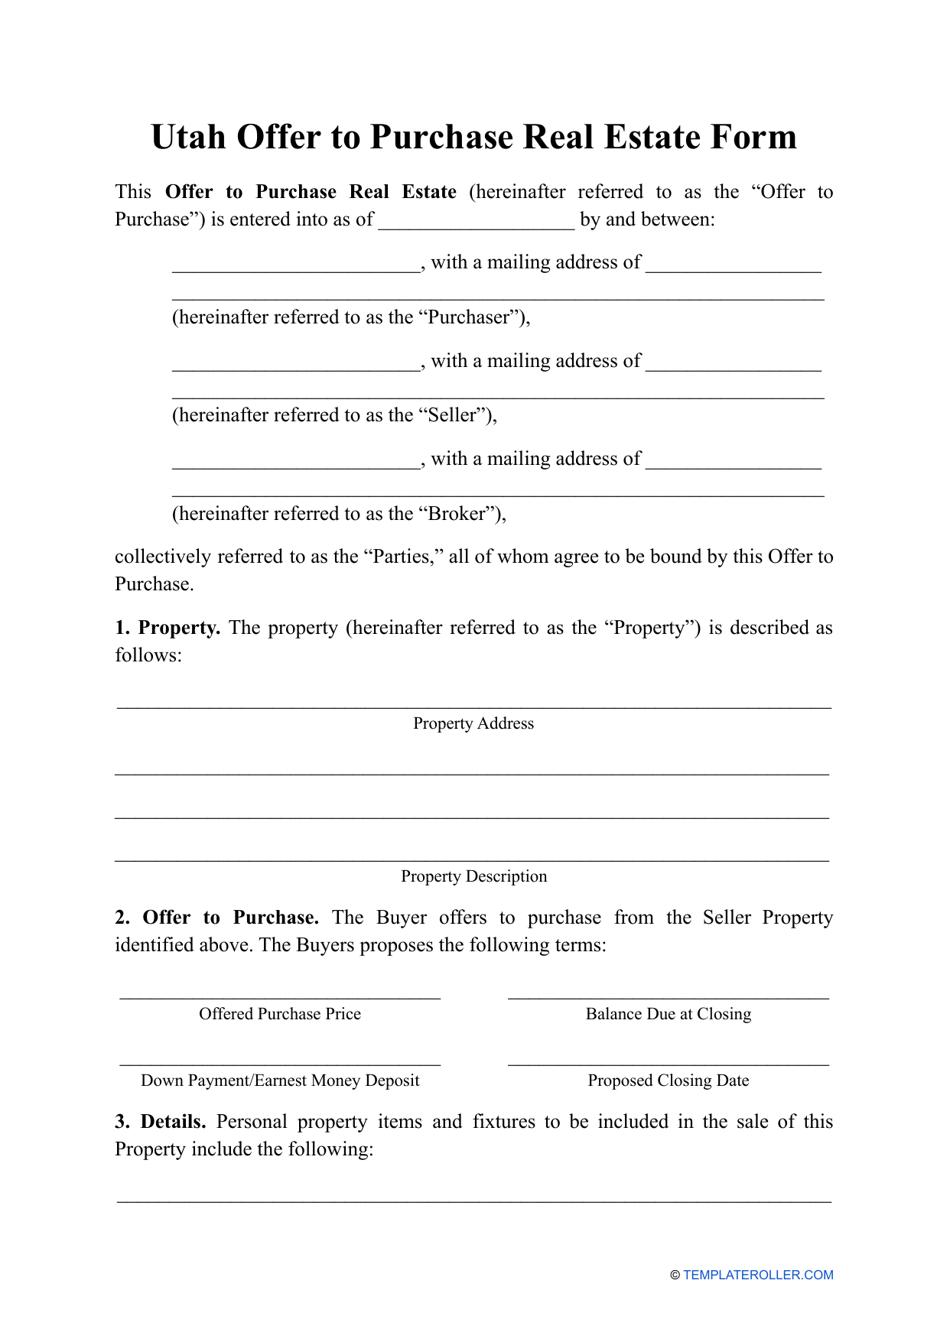 Offer to Purchase Real Estate Form - Utah, Page 1